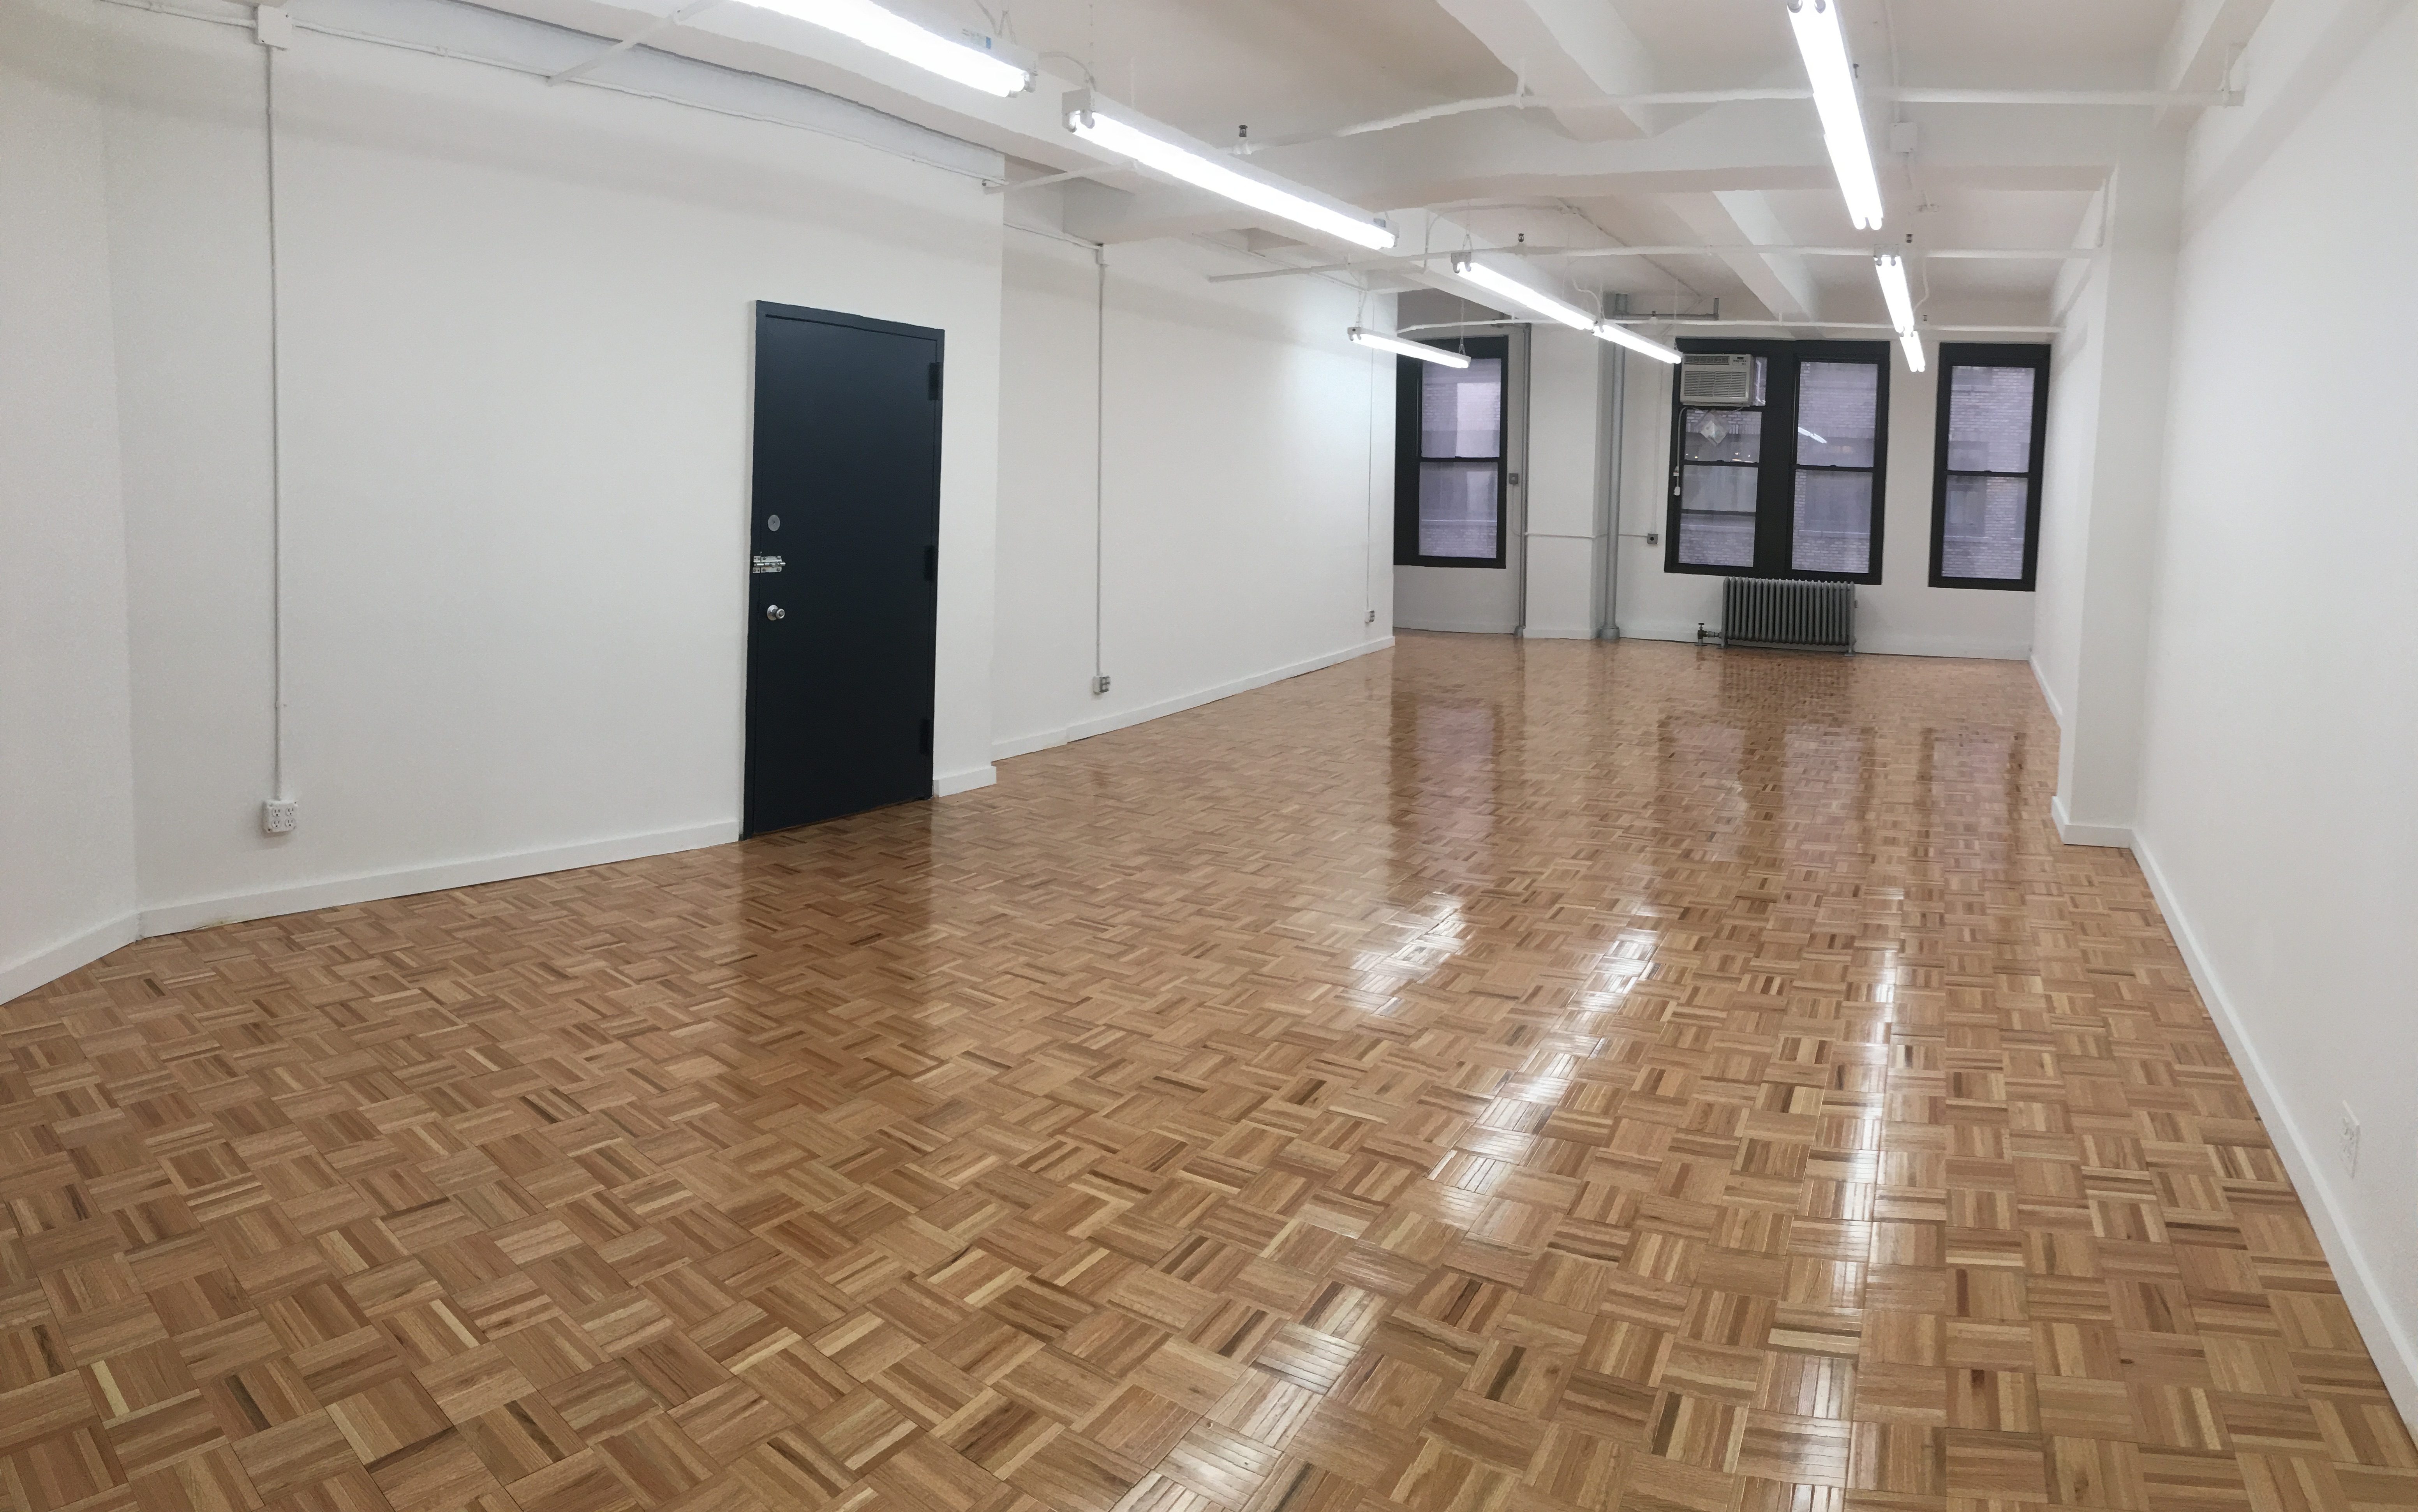 FANTASTIC OFFICE SPACE OPPORTUNITY IN PRIME MIDTOWN AREA ON 38TH ST!

***NO BROKER FEE***

*ALL USES CONSIDERED*

RENT:
$3,950/month 

SPACE: 
1150 SF 

TERM: 
New Lease

COMMENTS: 
- Newly Build Space
- White Box Condition
- Plenty of Natural Light 
- Large Windows

LOCATION: 
On 38th St between 7th & 8th Avenue 

NEIGHBORS: 
A, B, C, D, E, F, S and 7 Trains, Bryant Park, Red Lobster, Ruby Tuesday, Dominos, McDonalds, Walgreens

CONTACT: 
Aaron Aziz (516) 355-8018 
Access to all commercial spaces in the city.
Feel free to contact me with your requirements or any questions you may have.